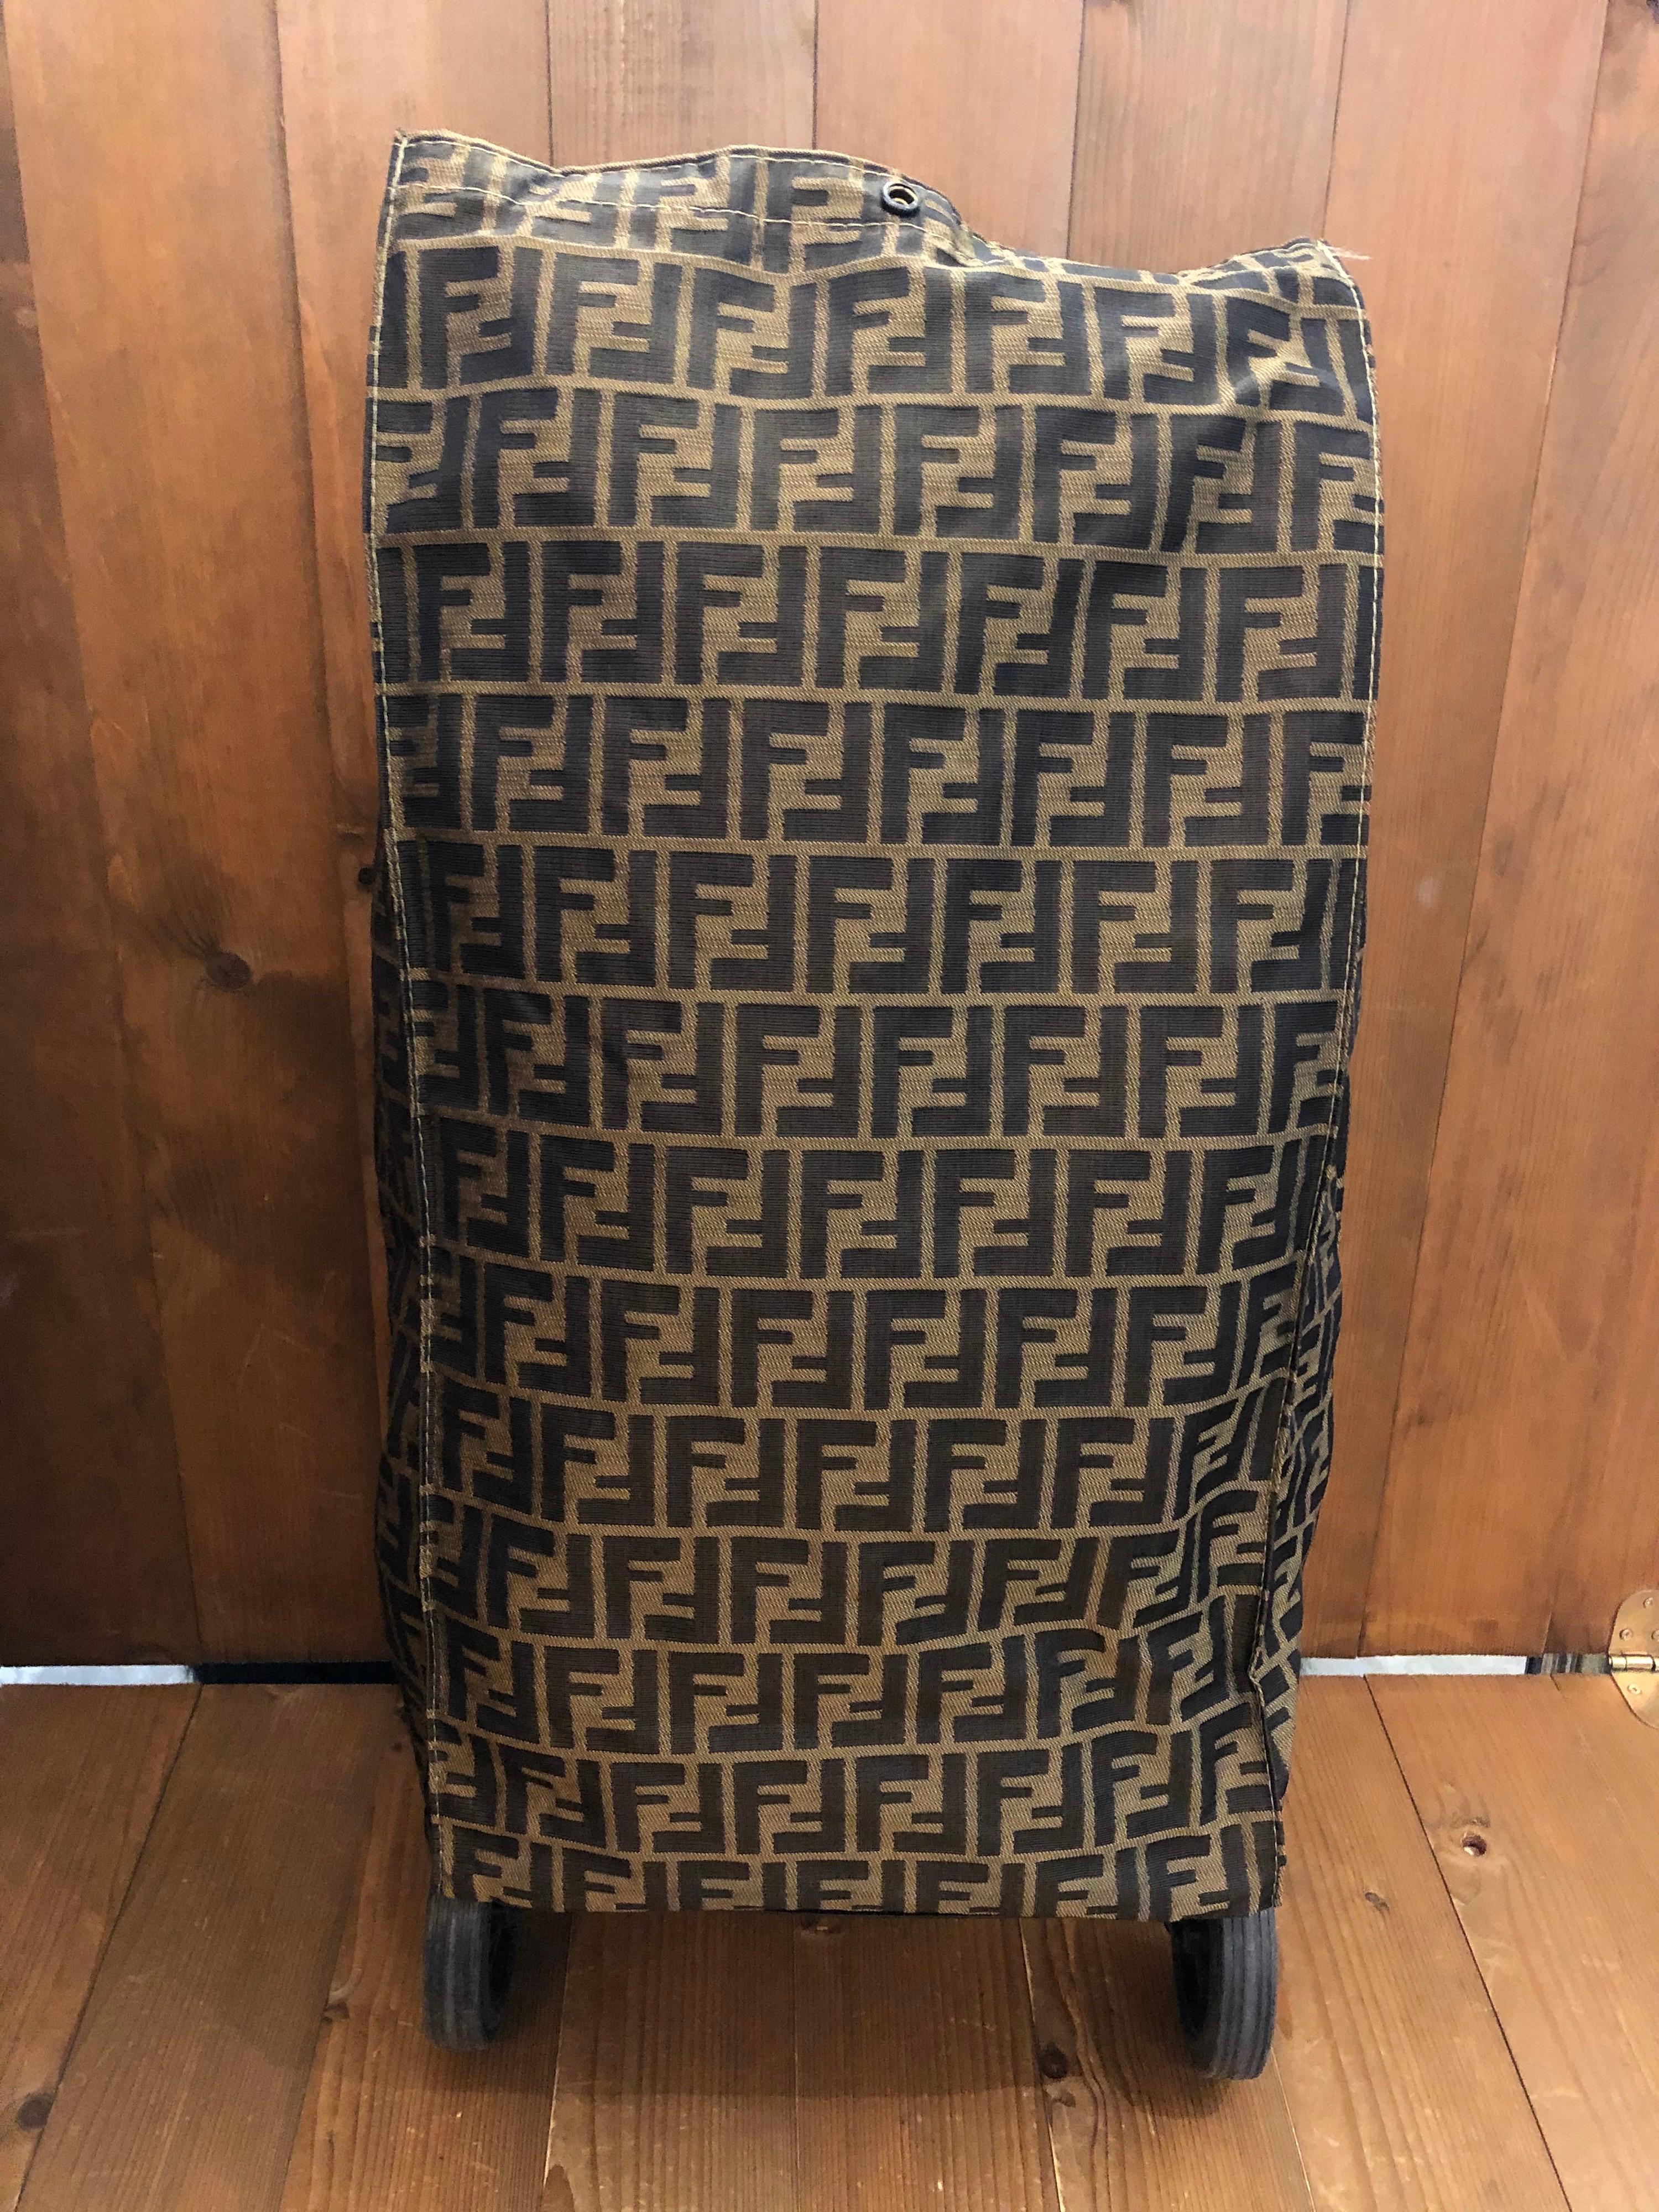 Fendi Rolling Luggage Trolley Bag in iconic brown Zucca jacquard. Foldable for easy storage. Made in Italy. Measures 30 x 19 x 60 cm Drop 18 cm. 

Condition: Minor signs of wear. Generally in good condition.